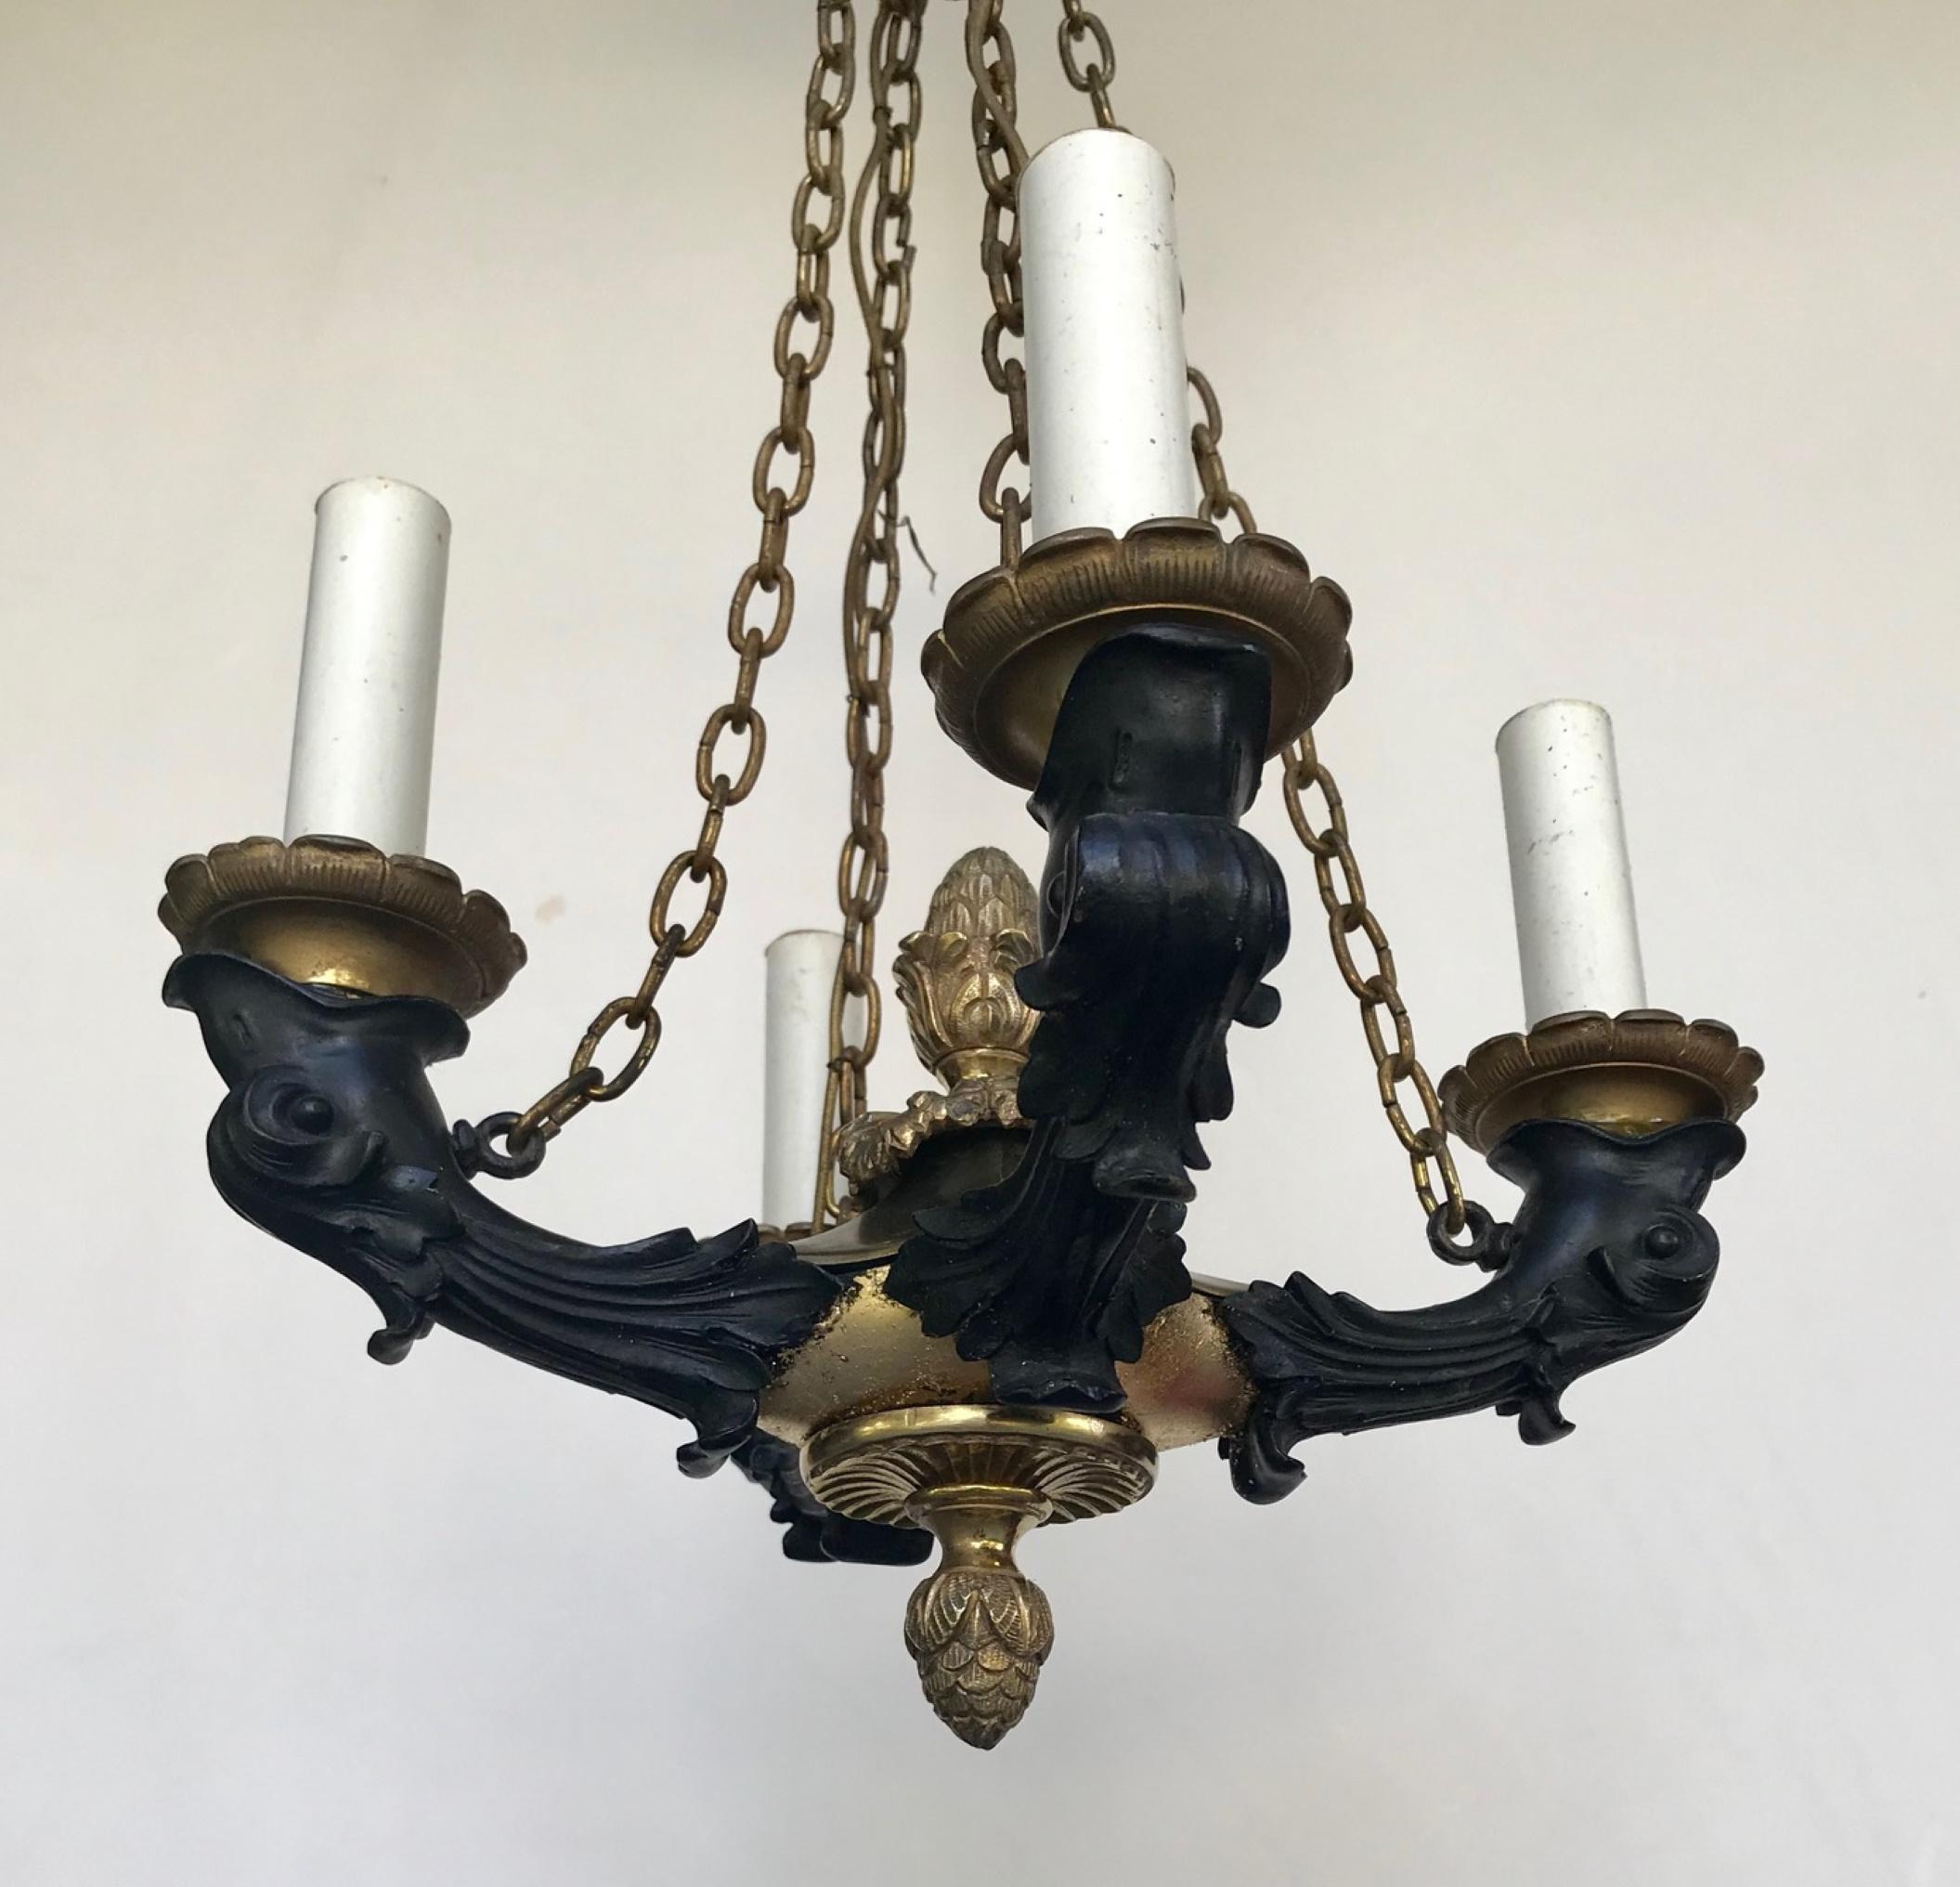 19th century French empire small patinated bronze chandelier.

Classic French Empire small bronze four light chandelier. It has rich ormolu finials and ornamentation. Four patinated bronze dolphin heads hold the candle cups. Condition is good with